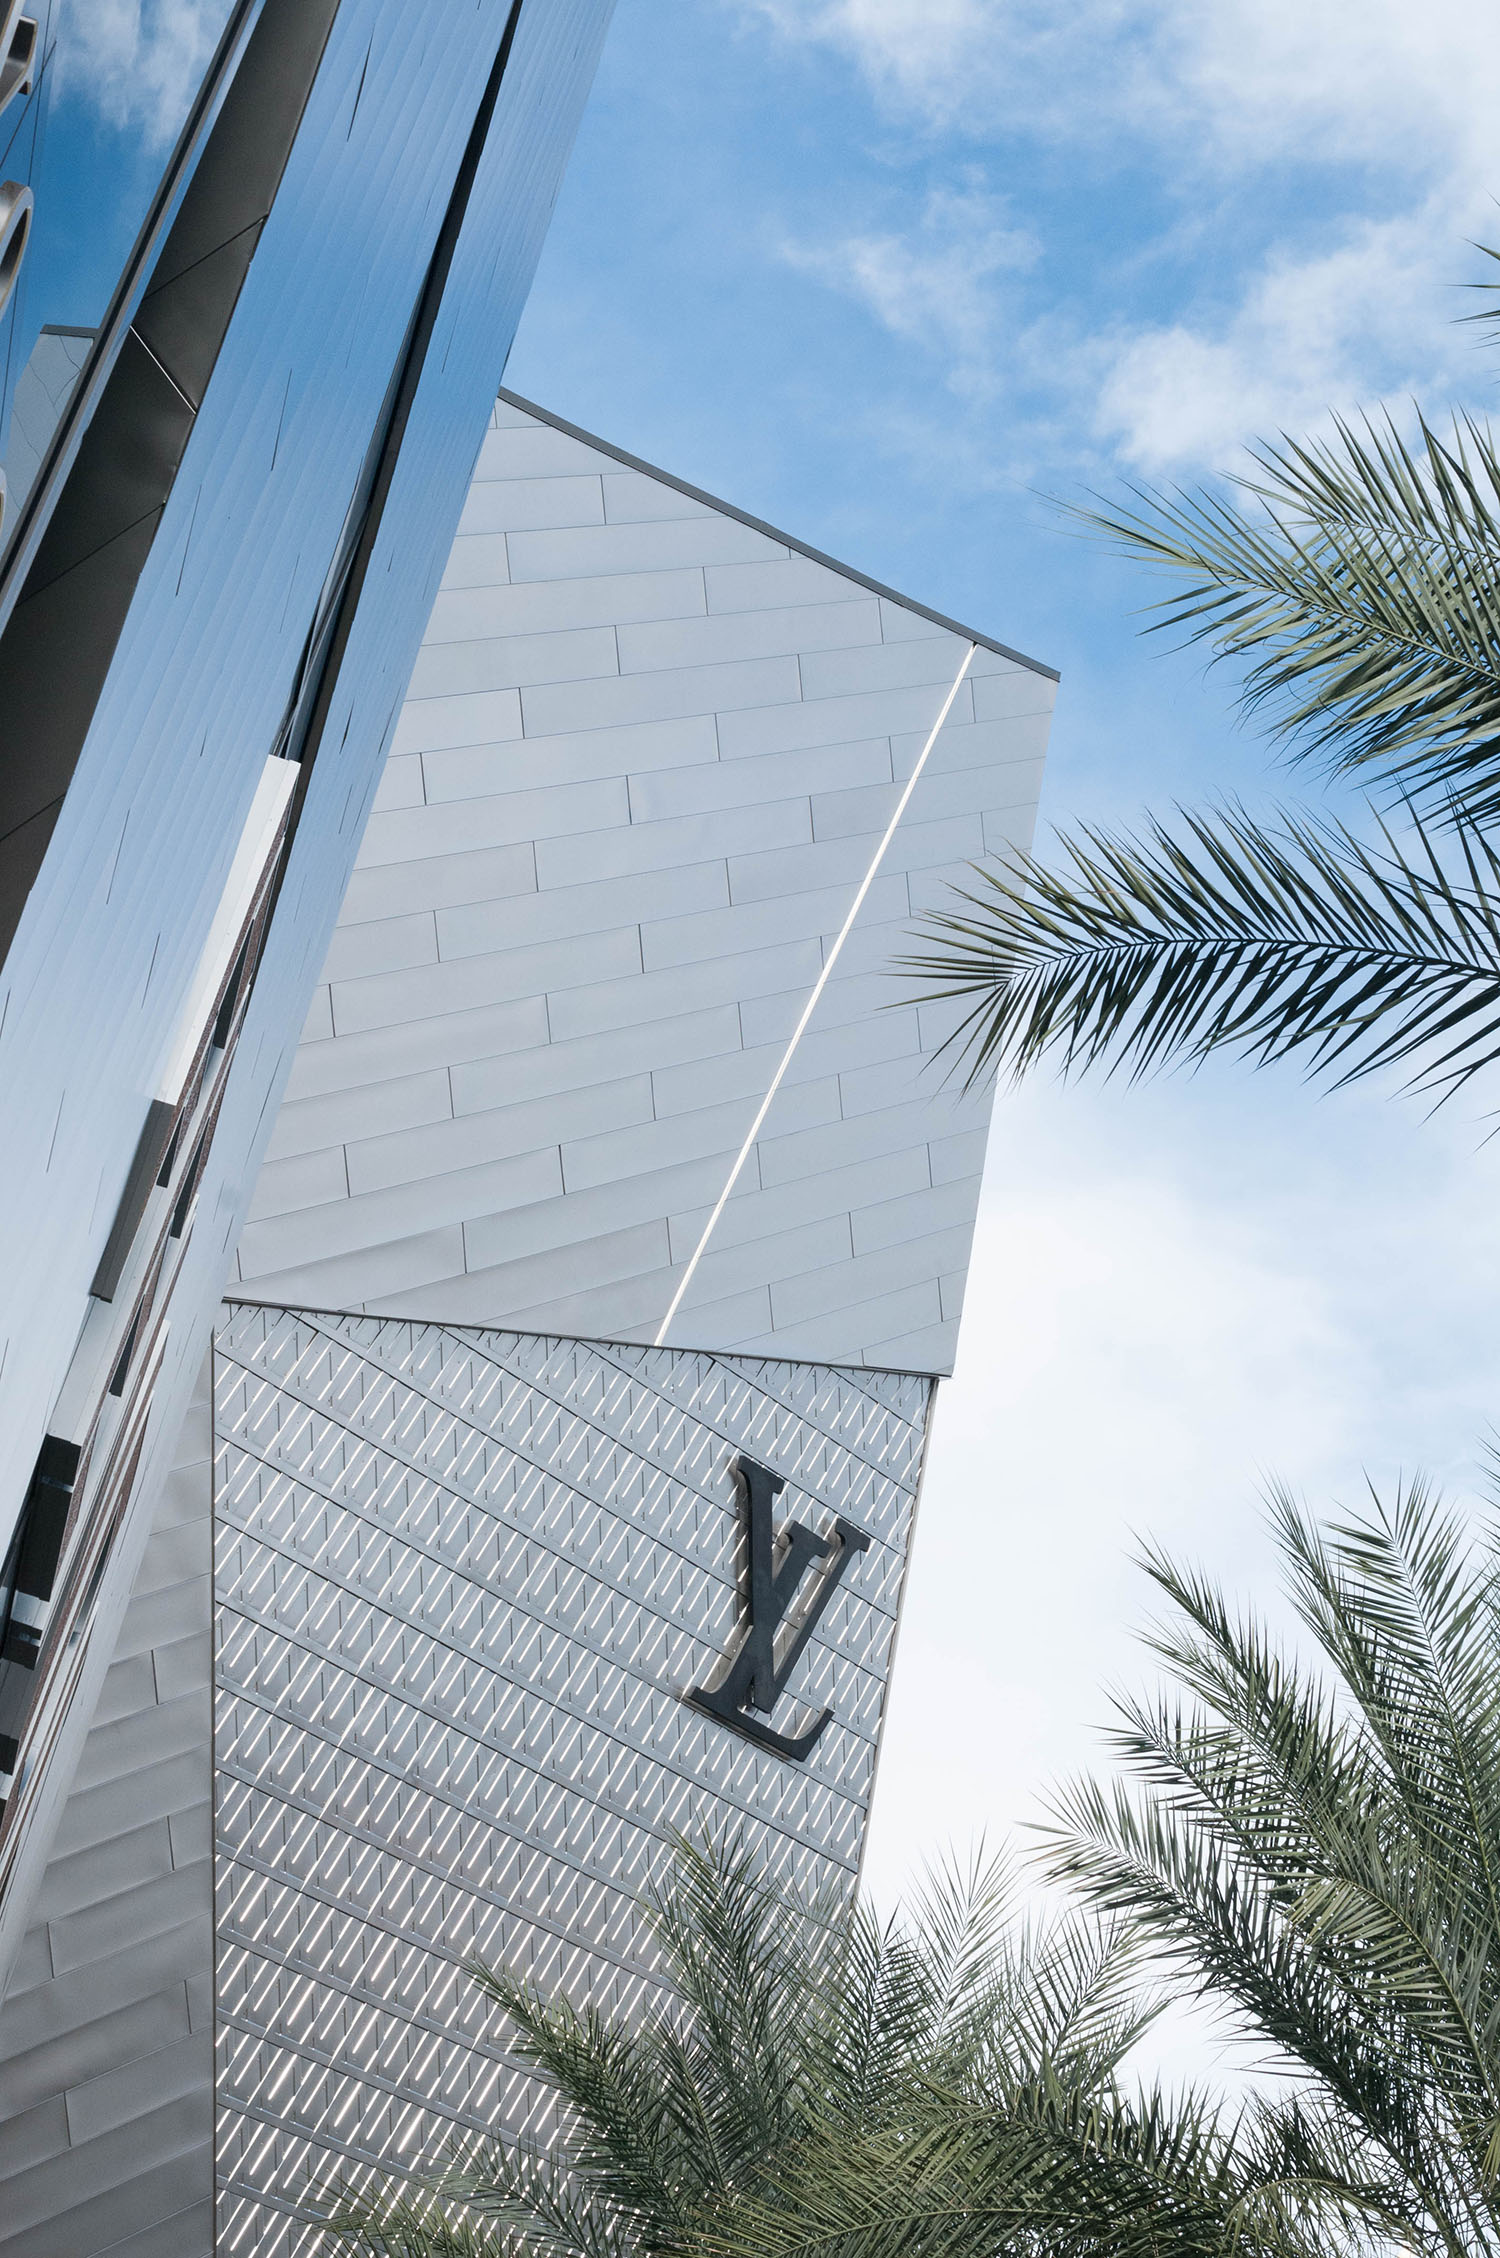 Louis Vuitton at the Shops at Crystals in Las Vegas, as captured by top travel blogger Cee Fardoe of Coco & Vera